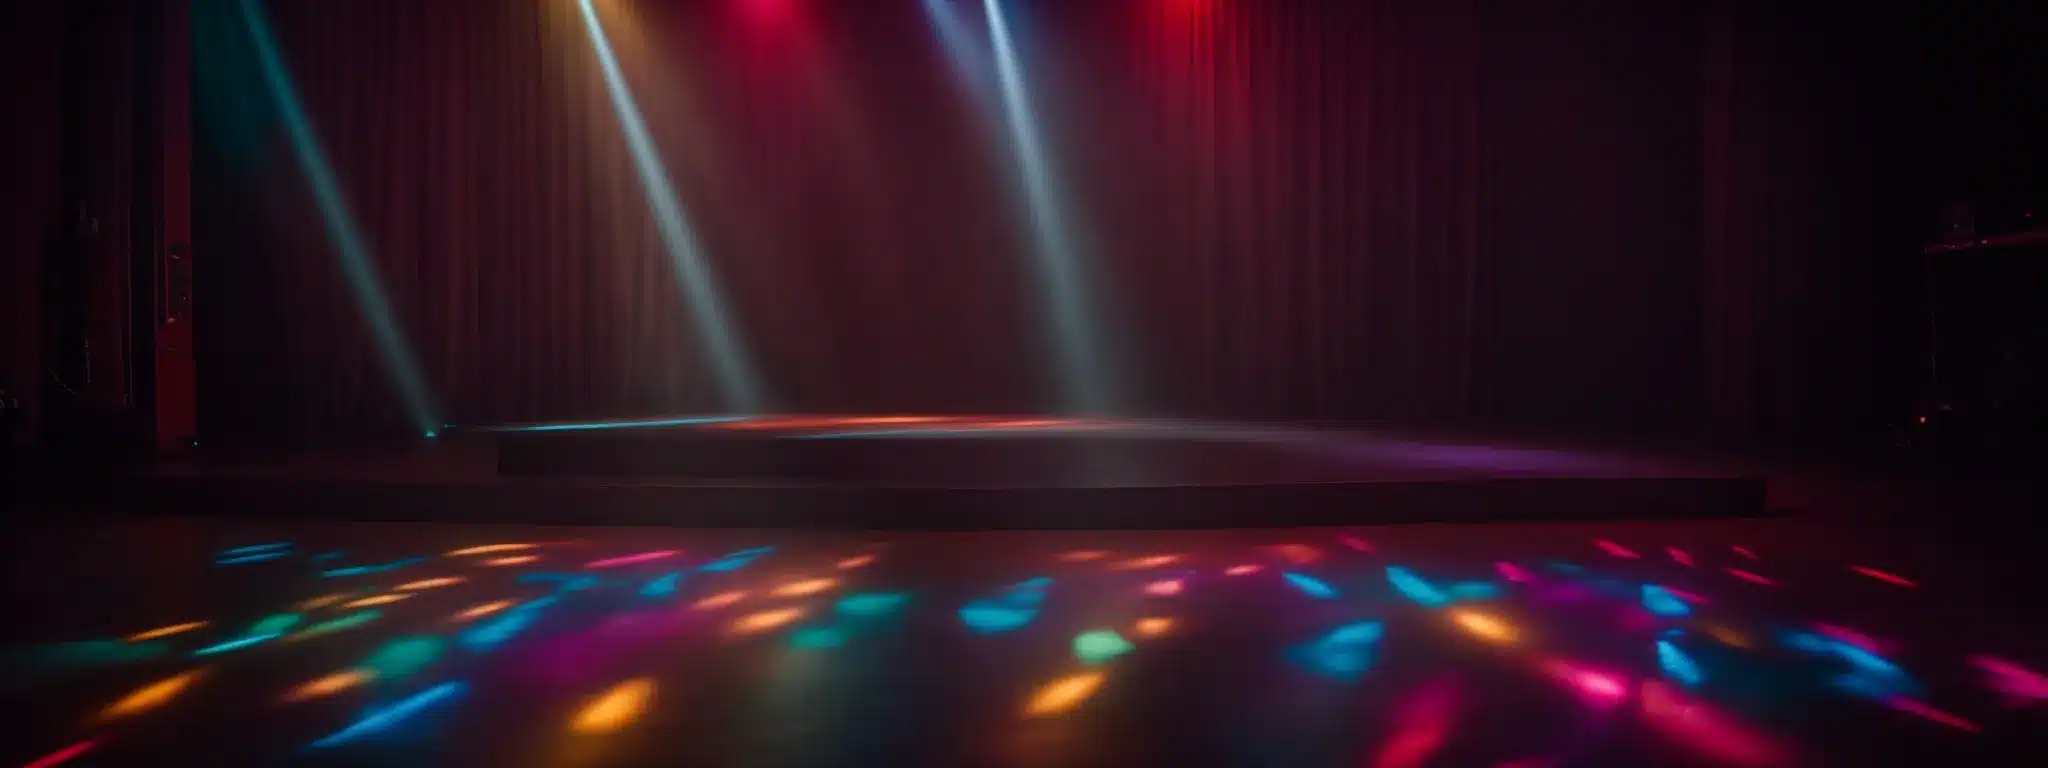 A Colorful, Illuminated Stage With A Dynamic Spotlight Highlighting An Empty Dance Floor Poised For Action.